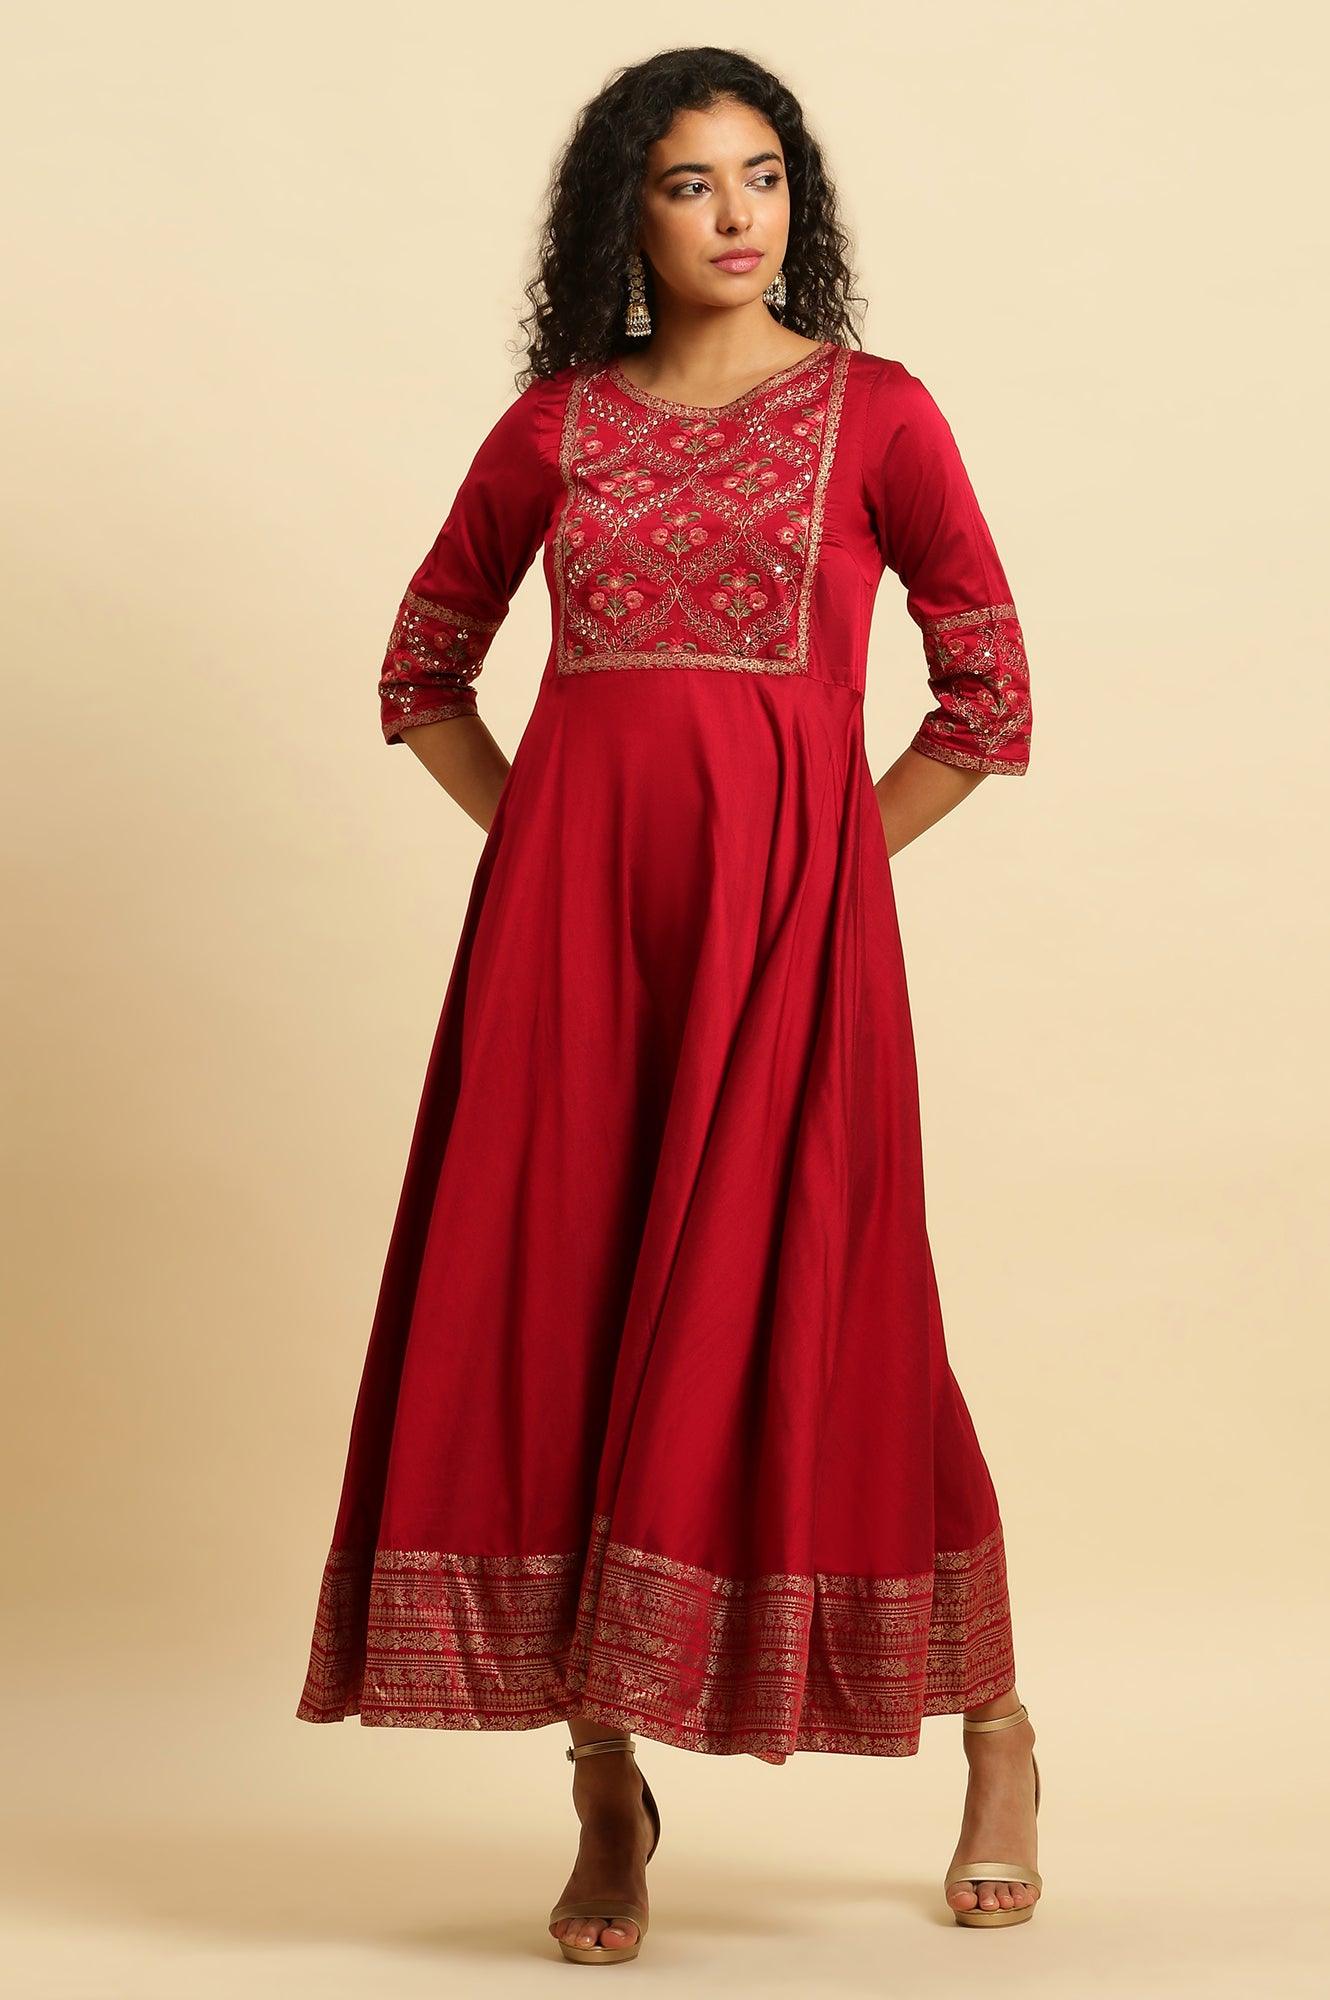 Red Panelled Embroidered Festive Dress - wforwoman